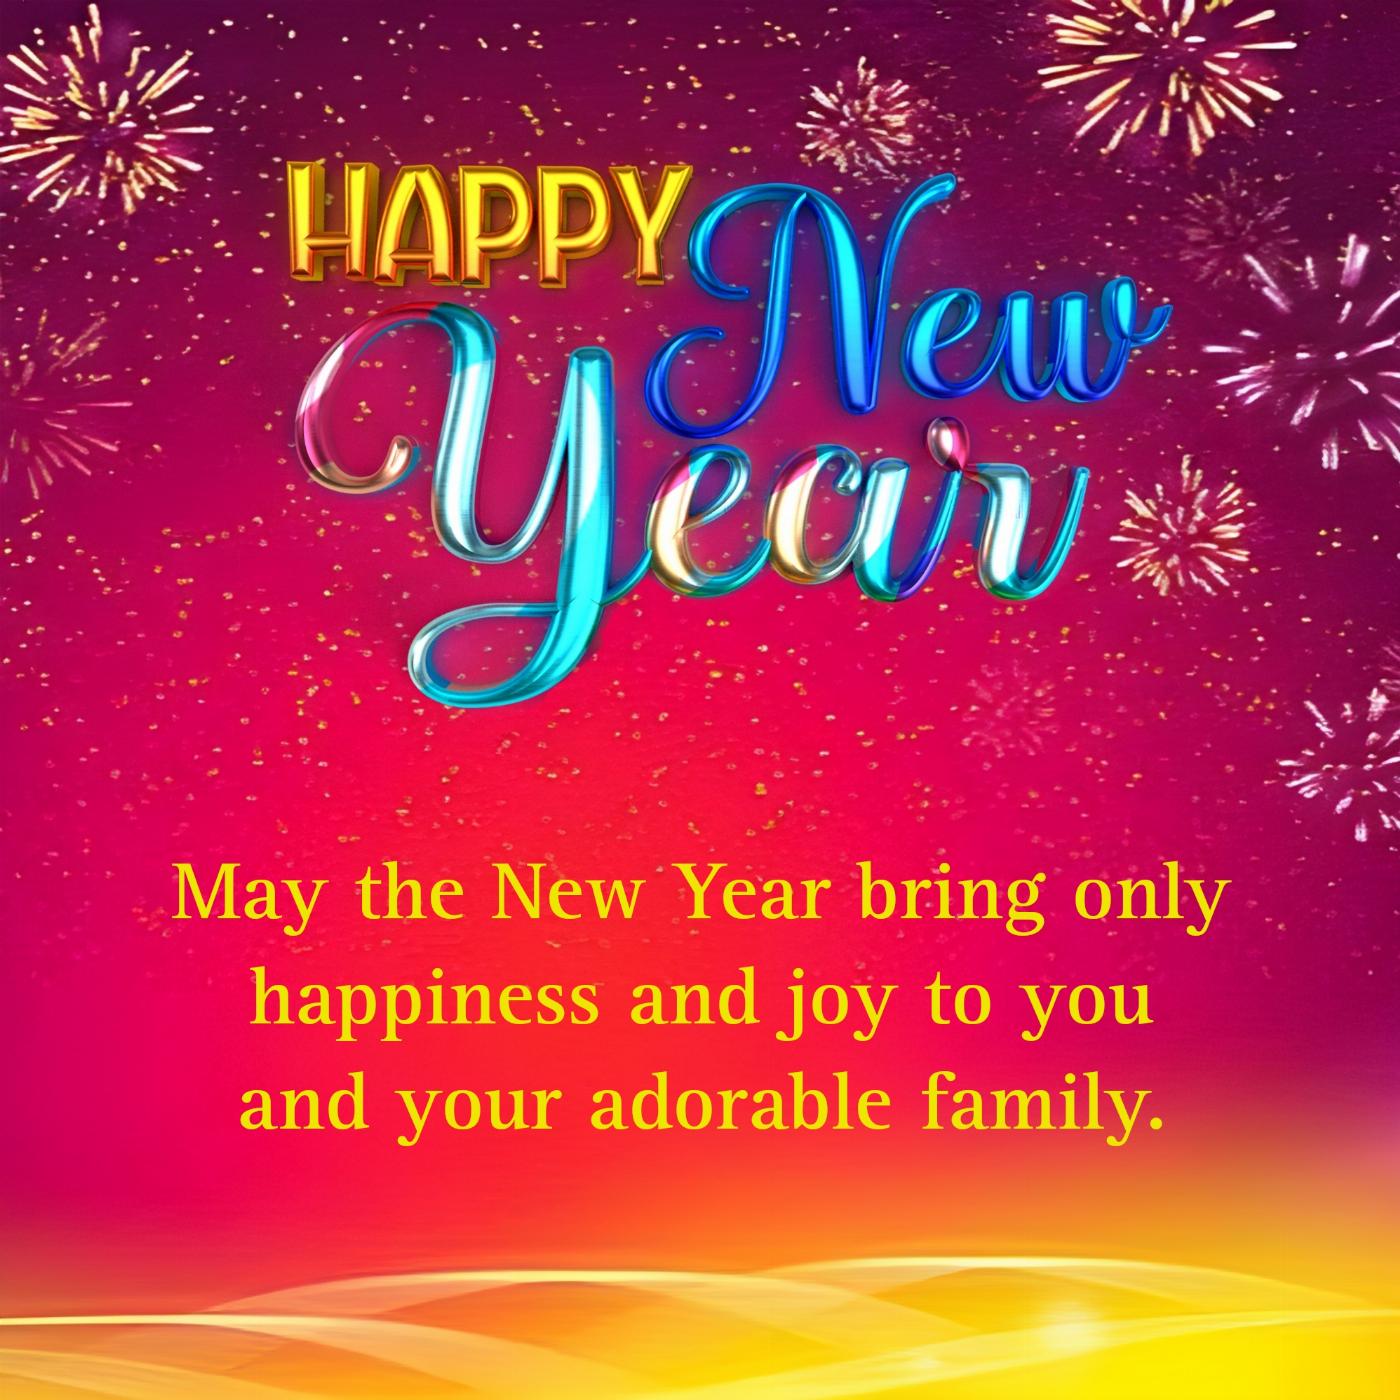 May the New Year bring only happiness and joy to you